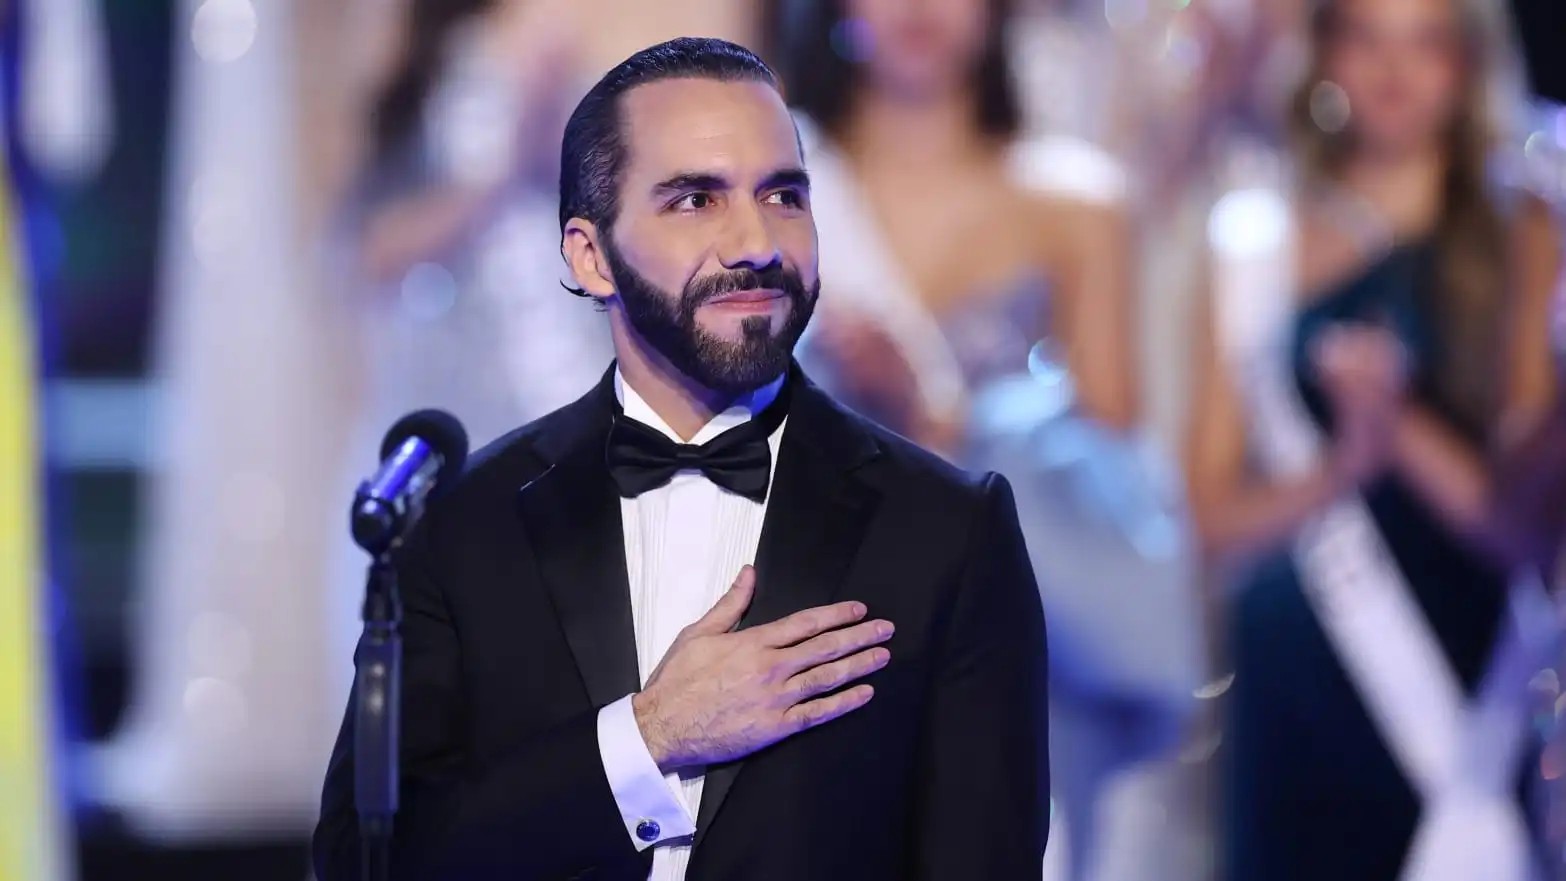 Image of Nayib Bukele wearing black coat and celebrating his re-election victory in El Salvador